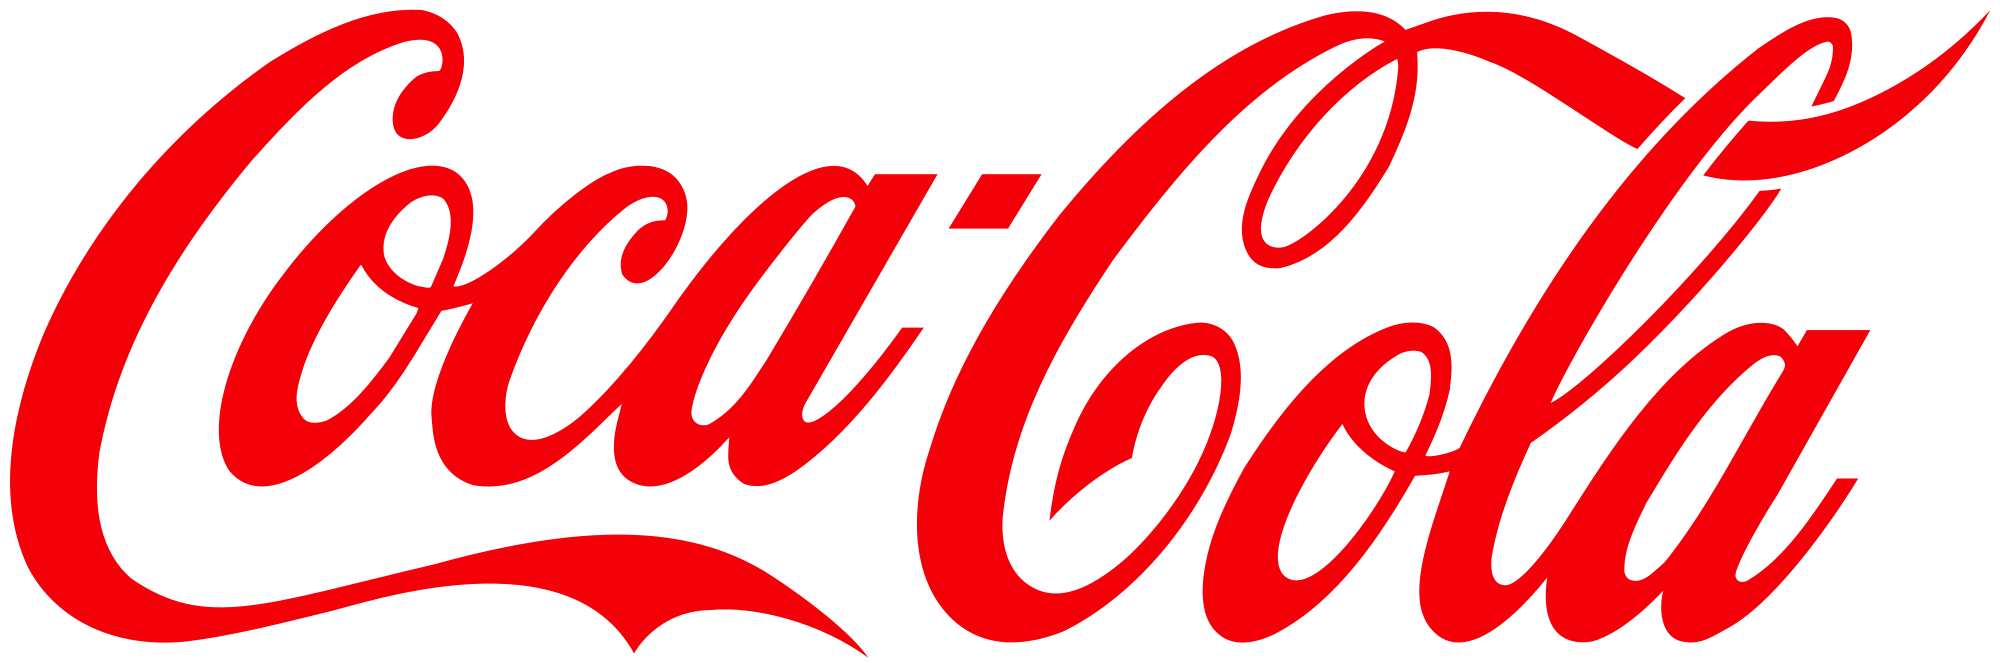 Attachment Logo - Coca cola logo png – Young Hoteliers Summit